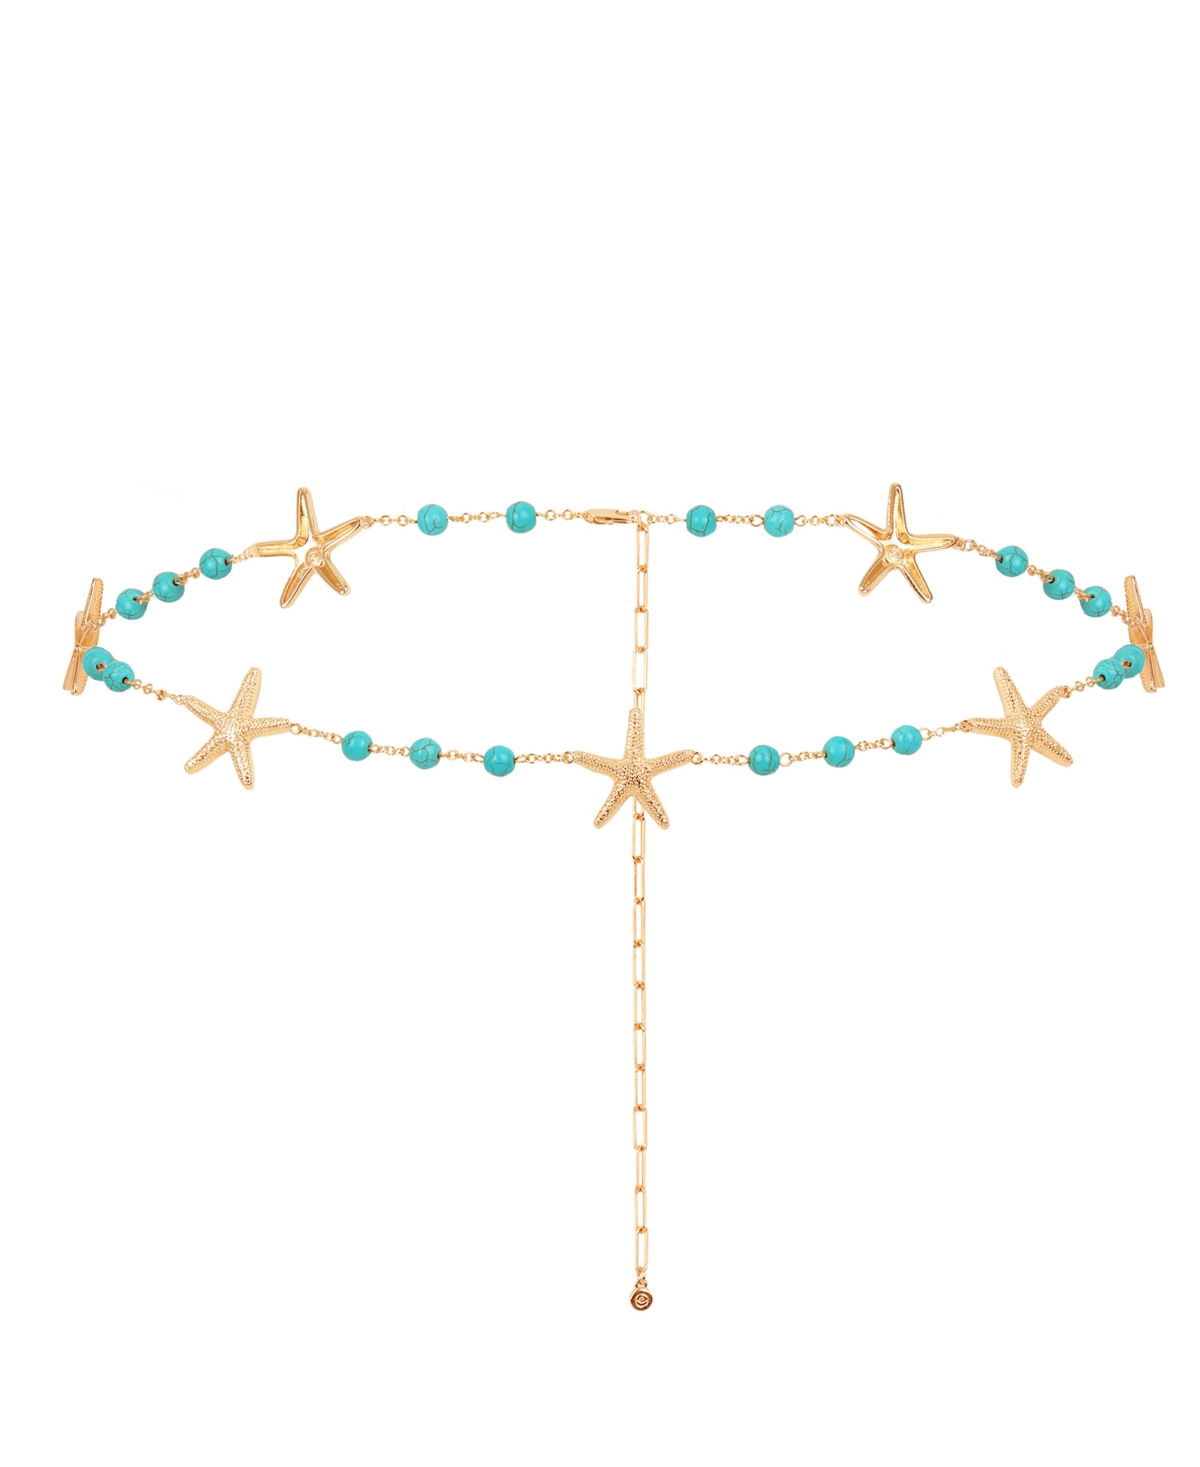 Starfish and Turquoise Linked Body Chain - Turquoise